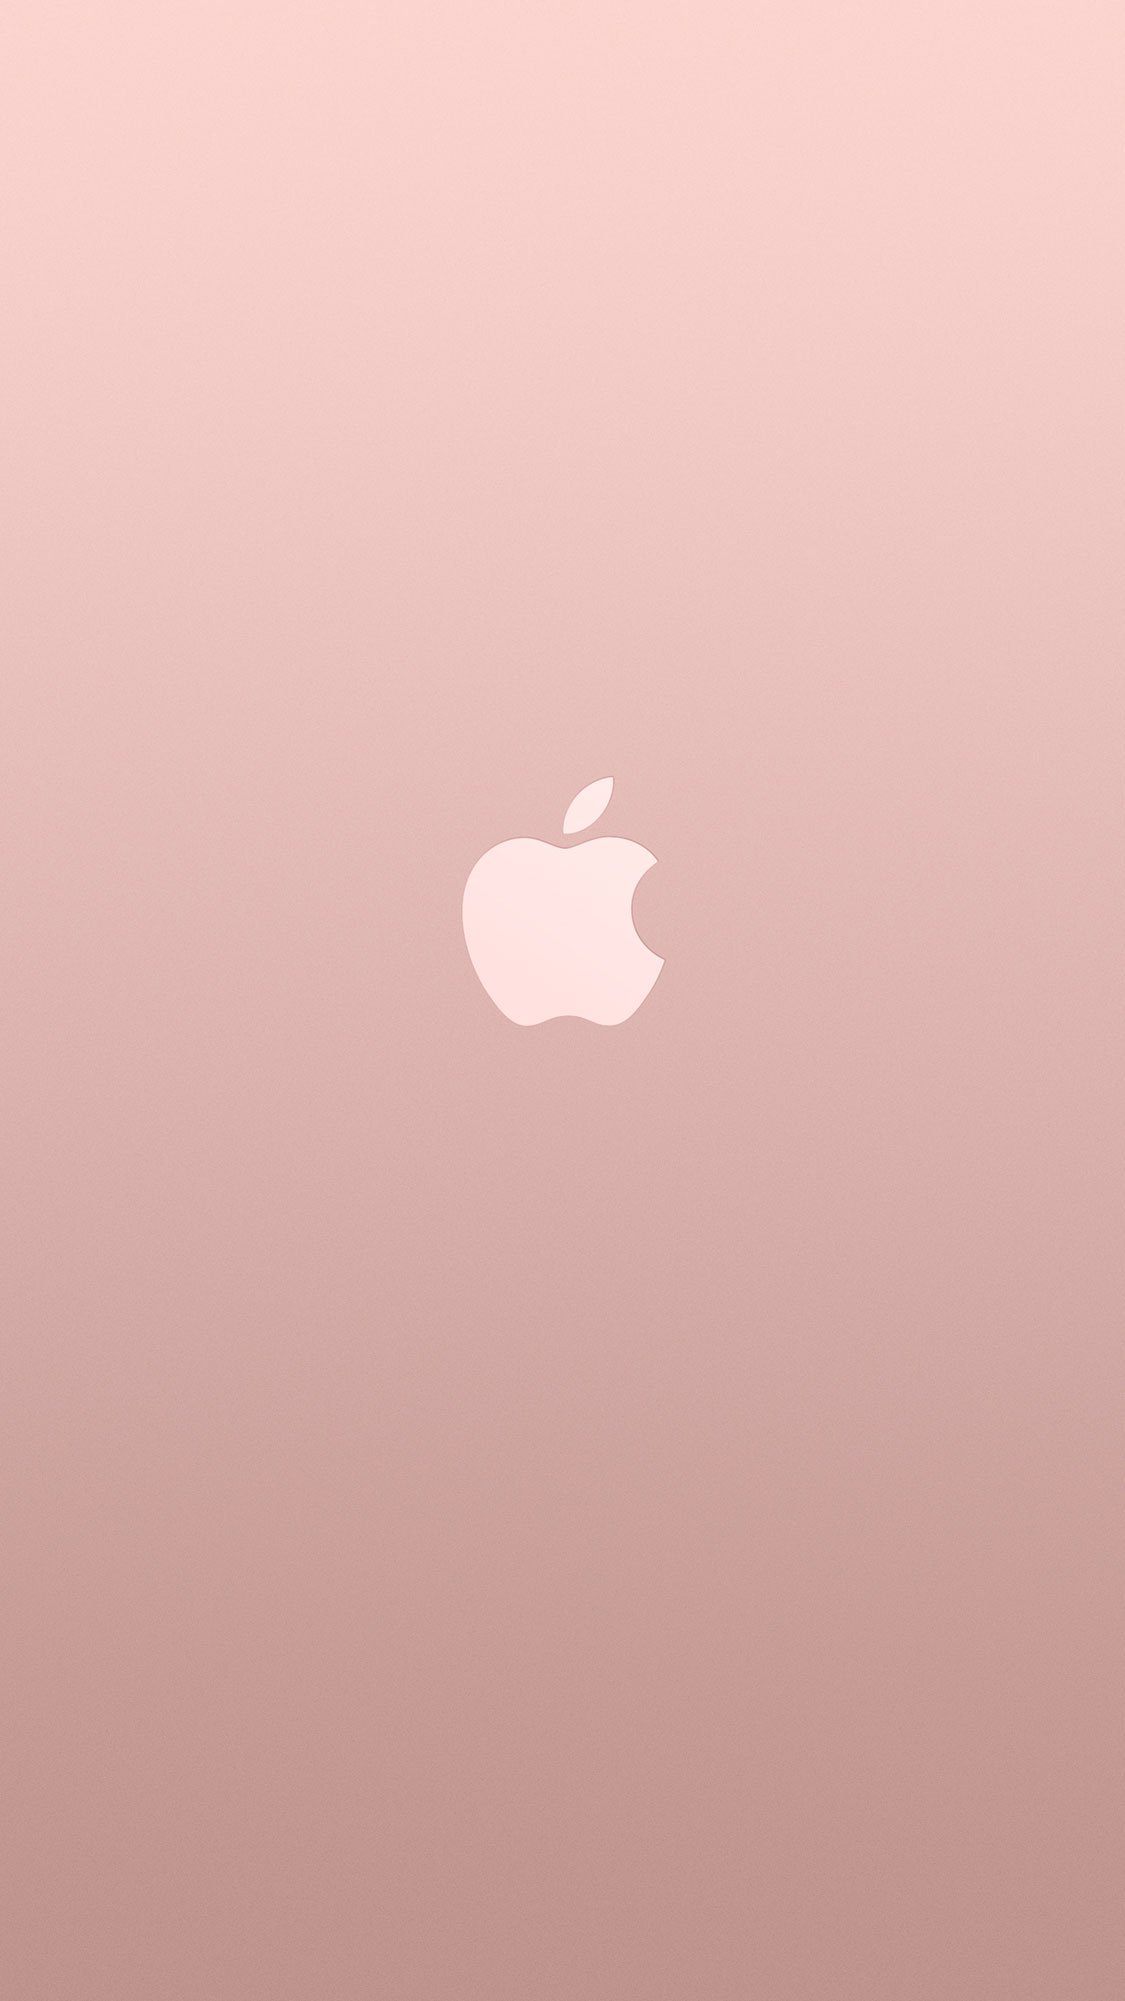 20 New Iphone 6 6s Wallpapers Backgrounds In Hd Quality